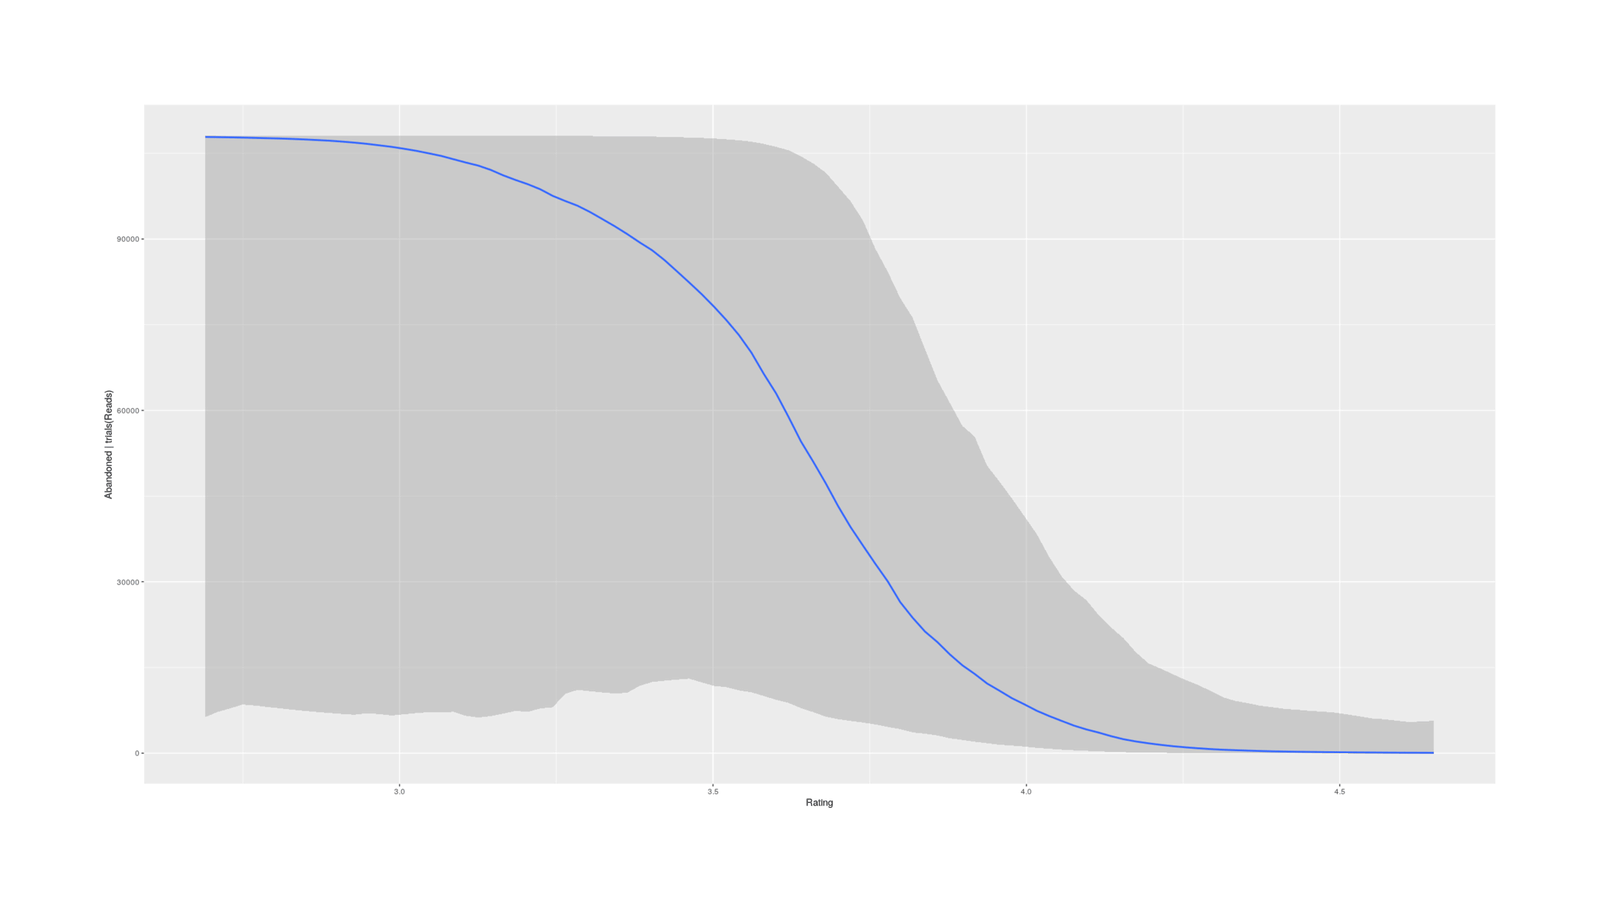 Nonlinear effect of average rating (1–5) percentile on predicted GoodReads abandonment rate